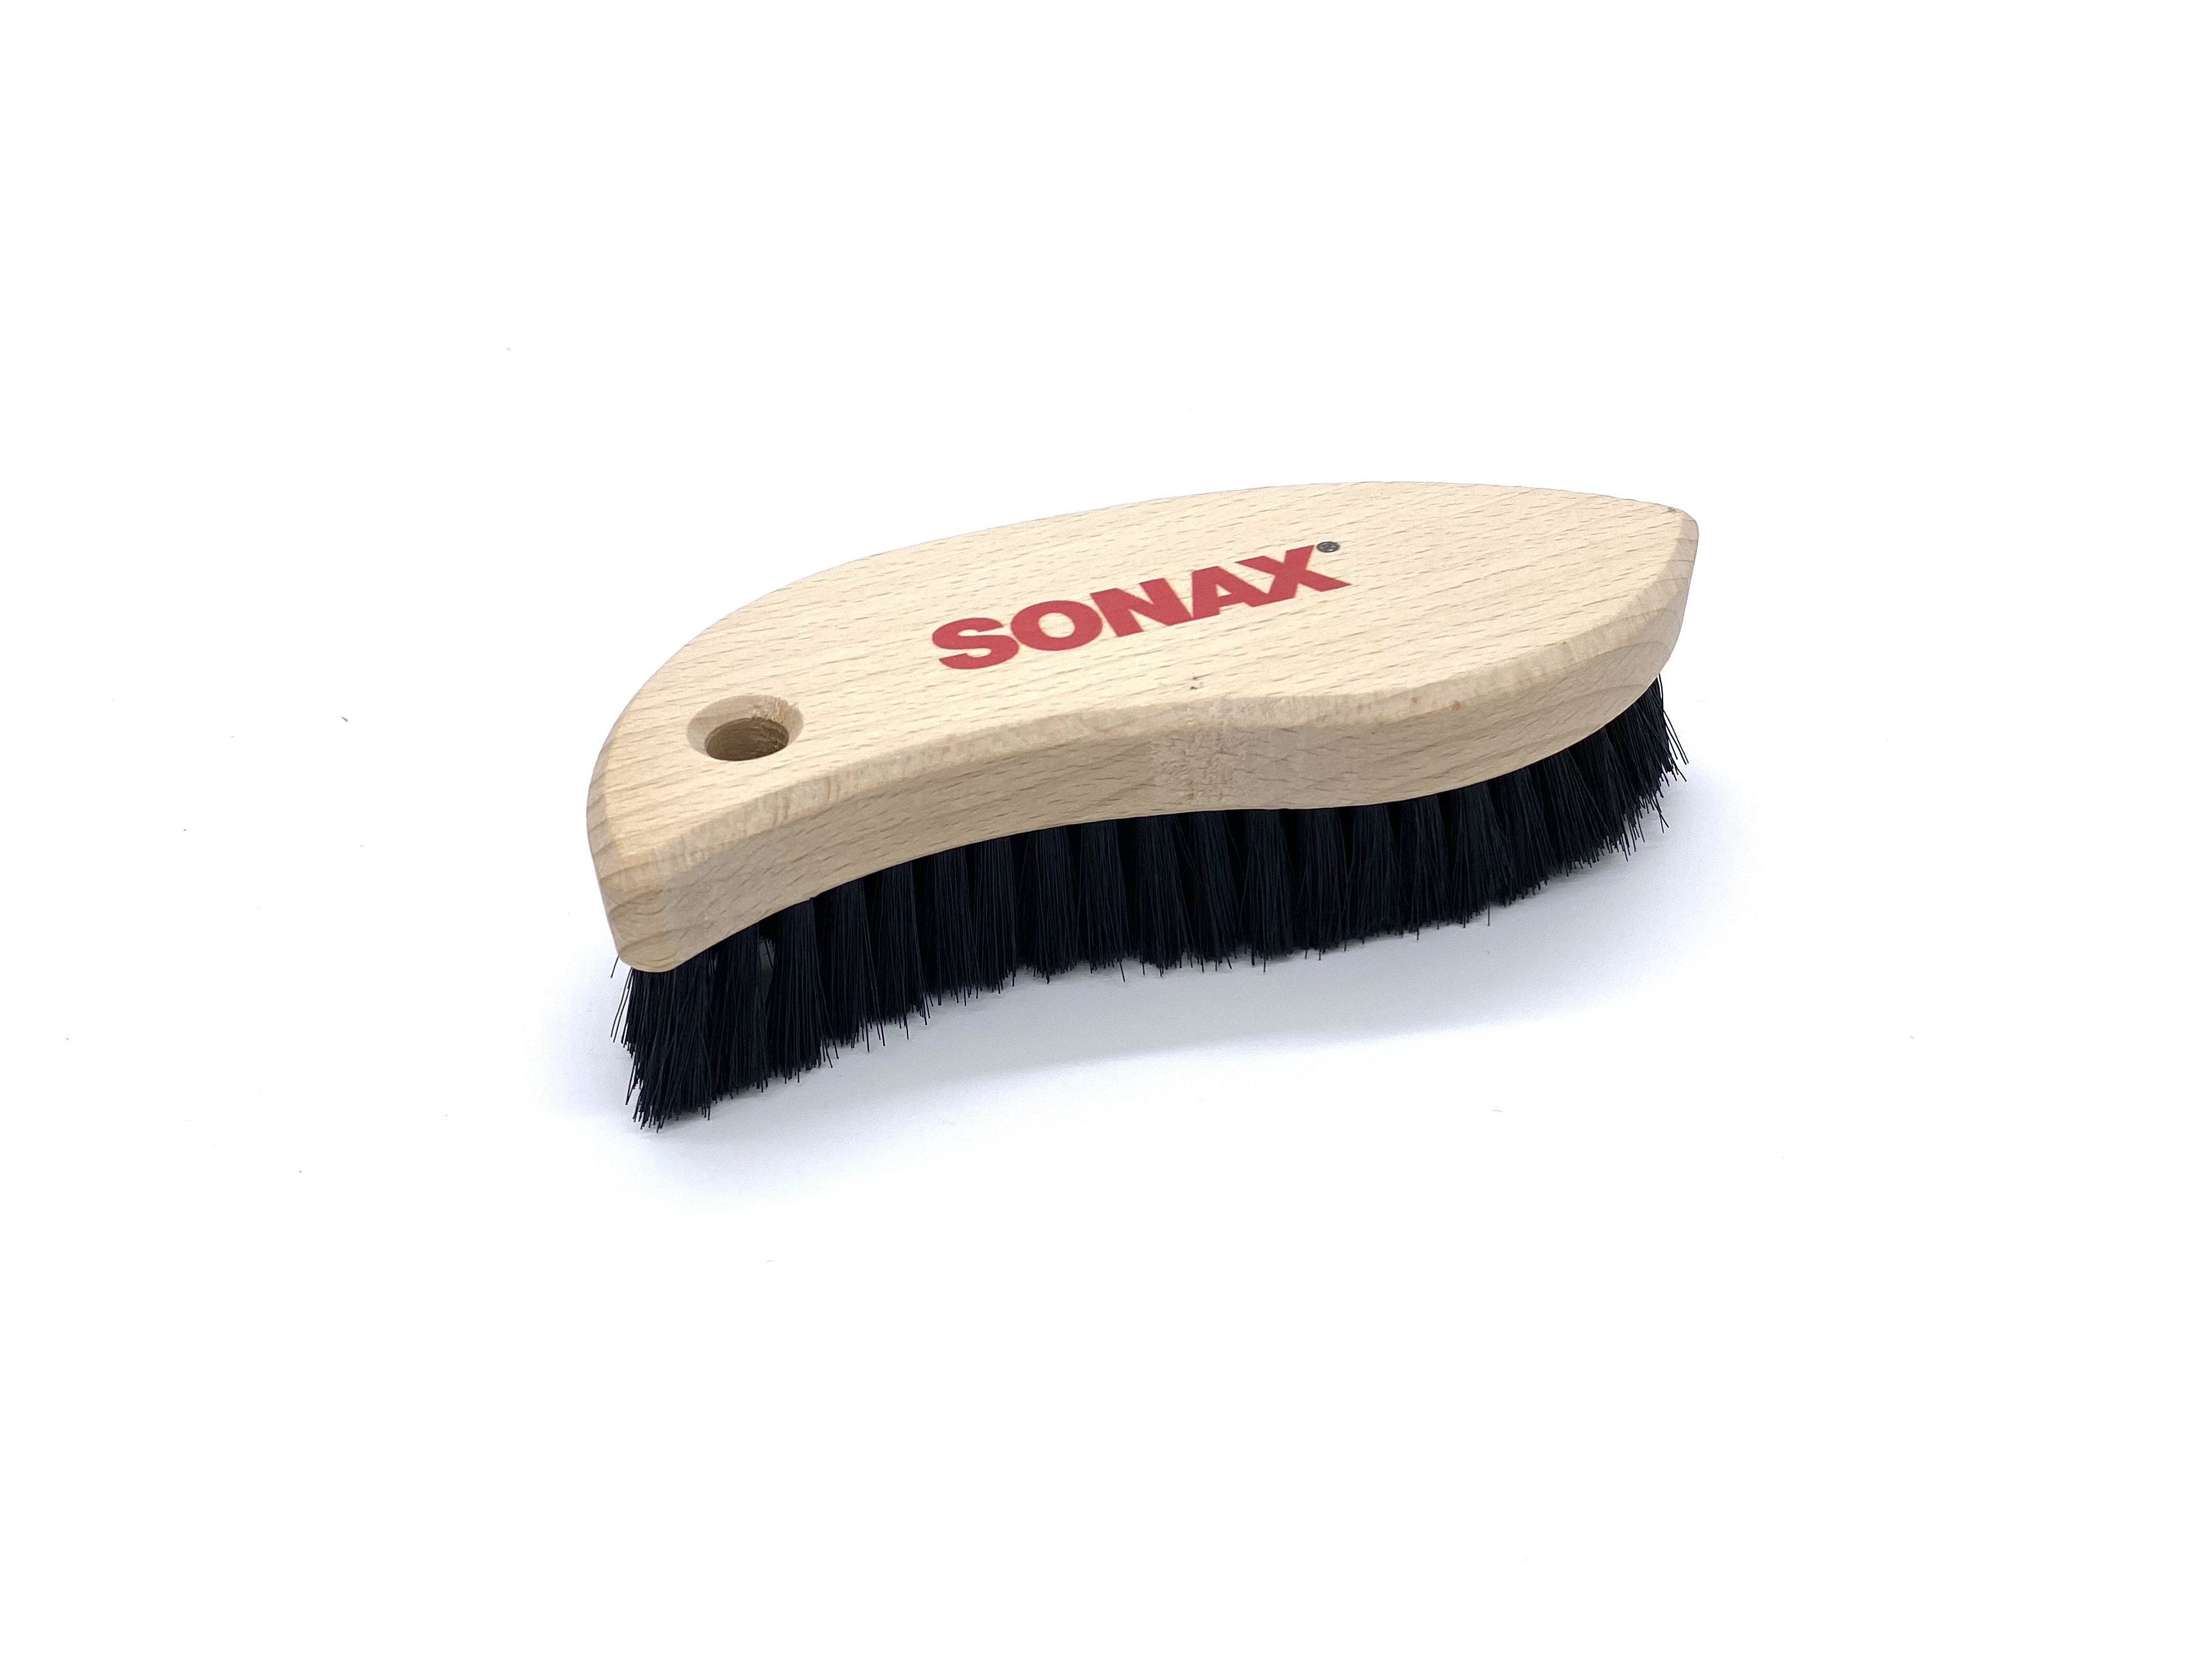 SONAX Textile and Leather Brush for car interior cleaning and car polishing